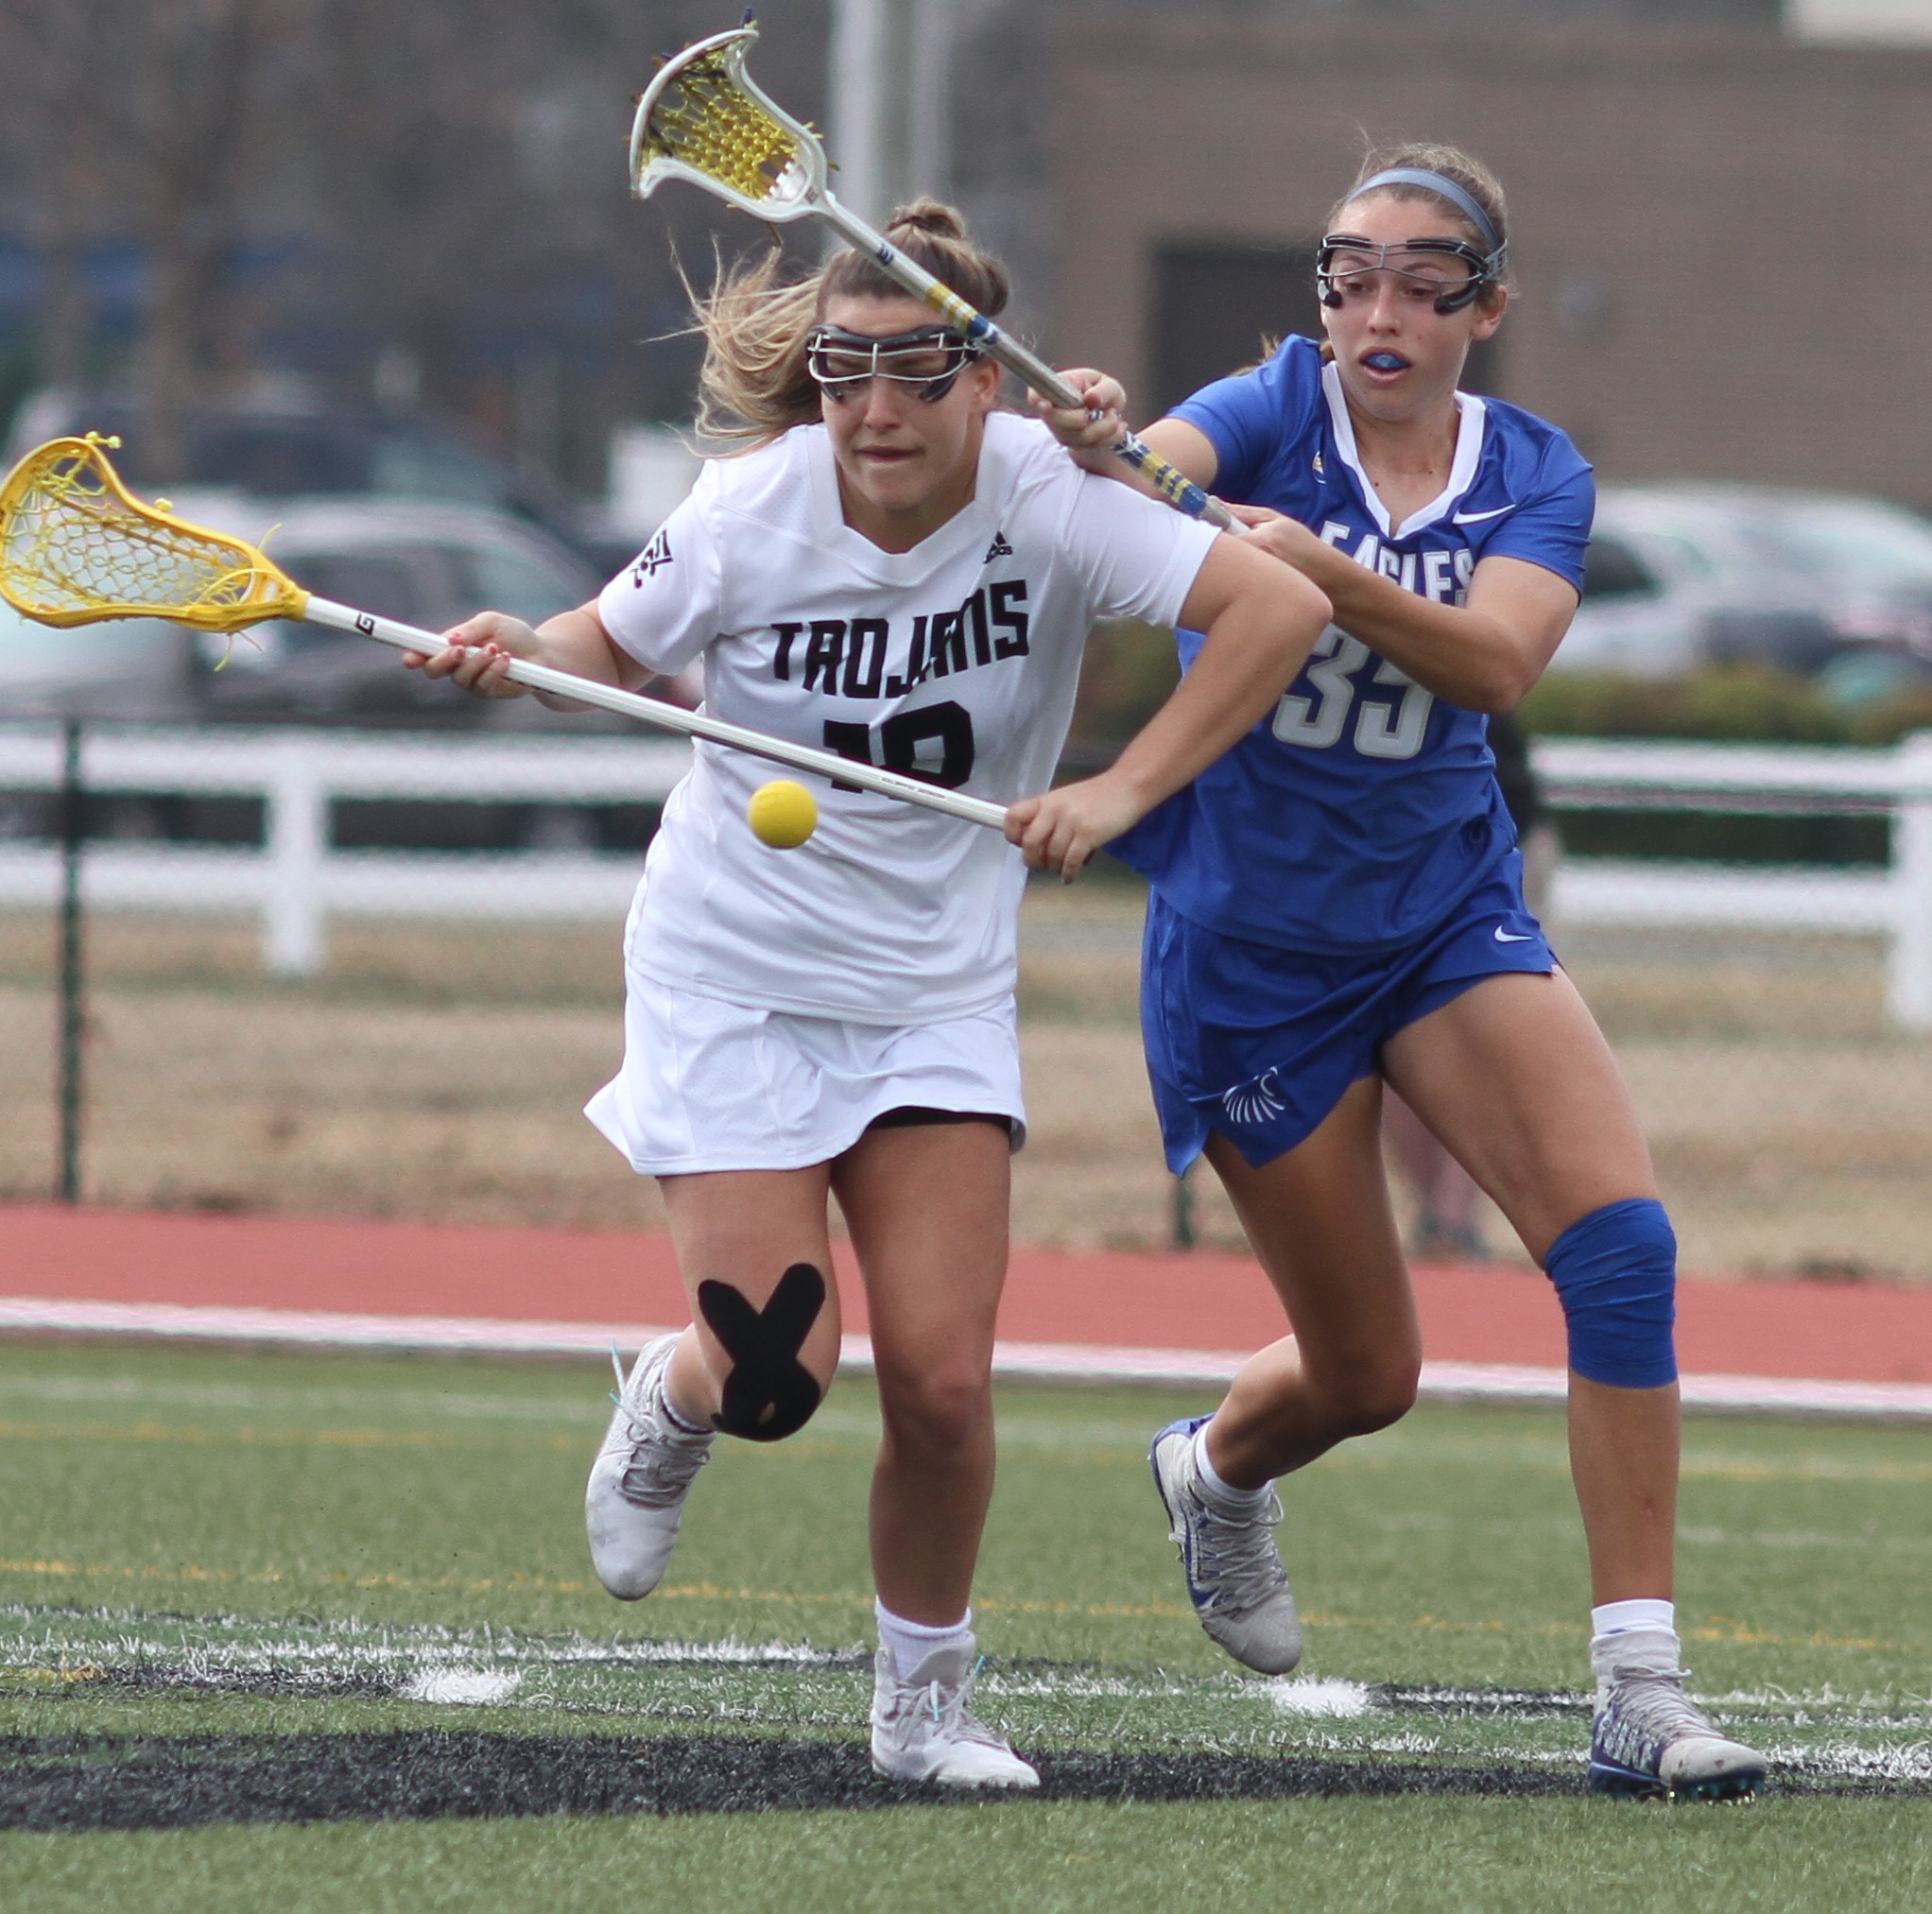 Women’s Lacrosse: Embry-Riddle At UMO (PHOTO GALLERY)